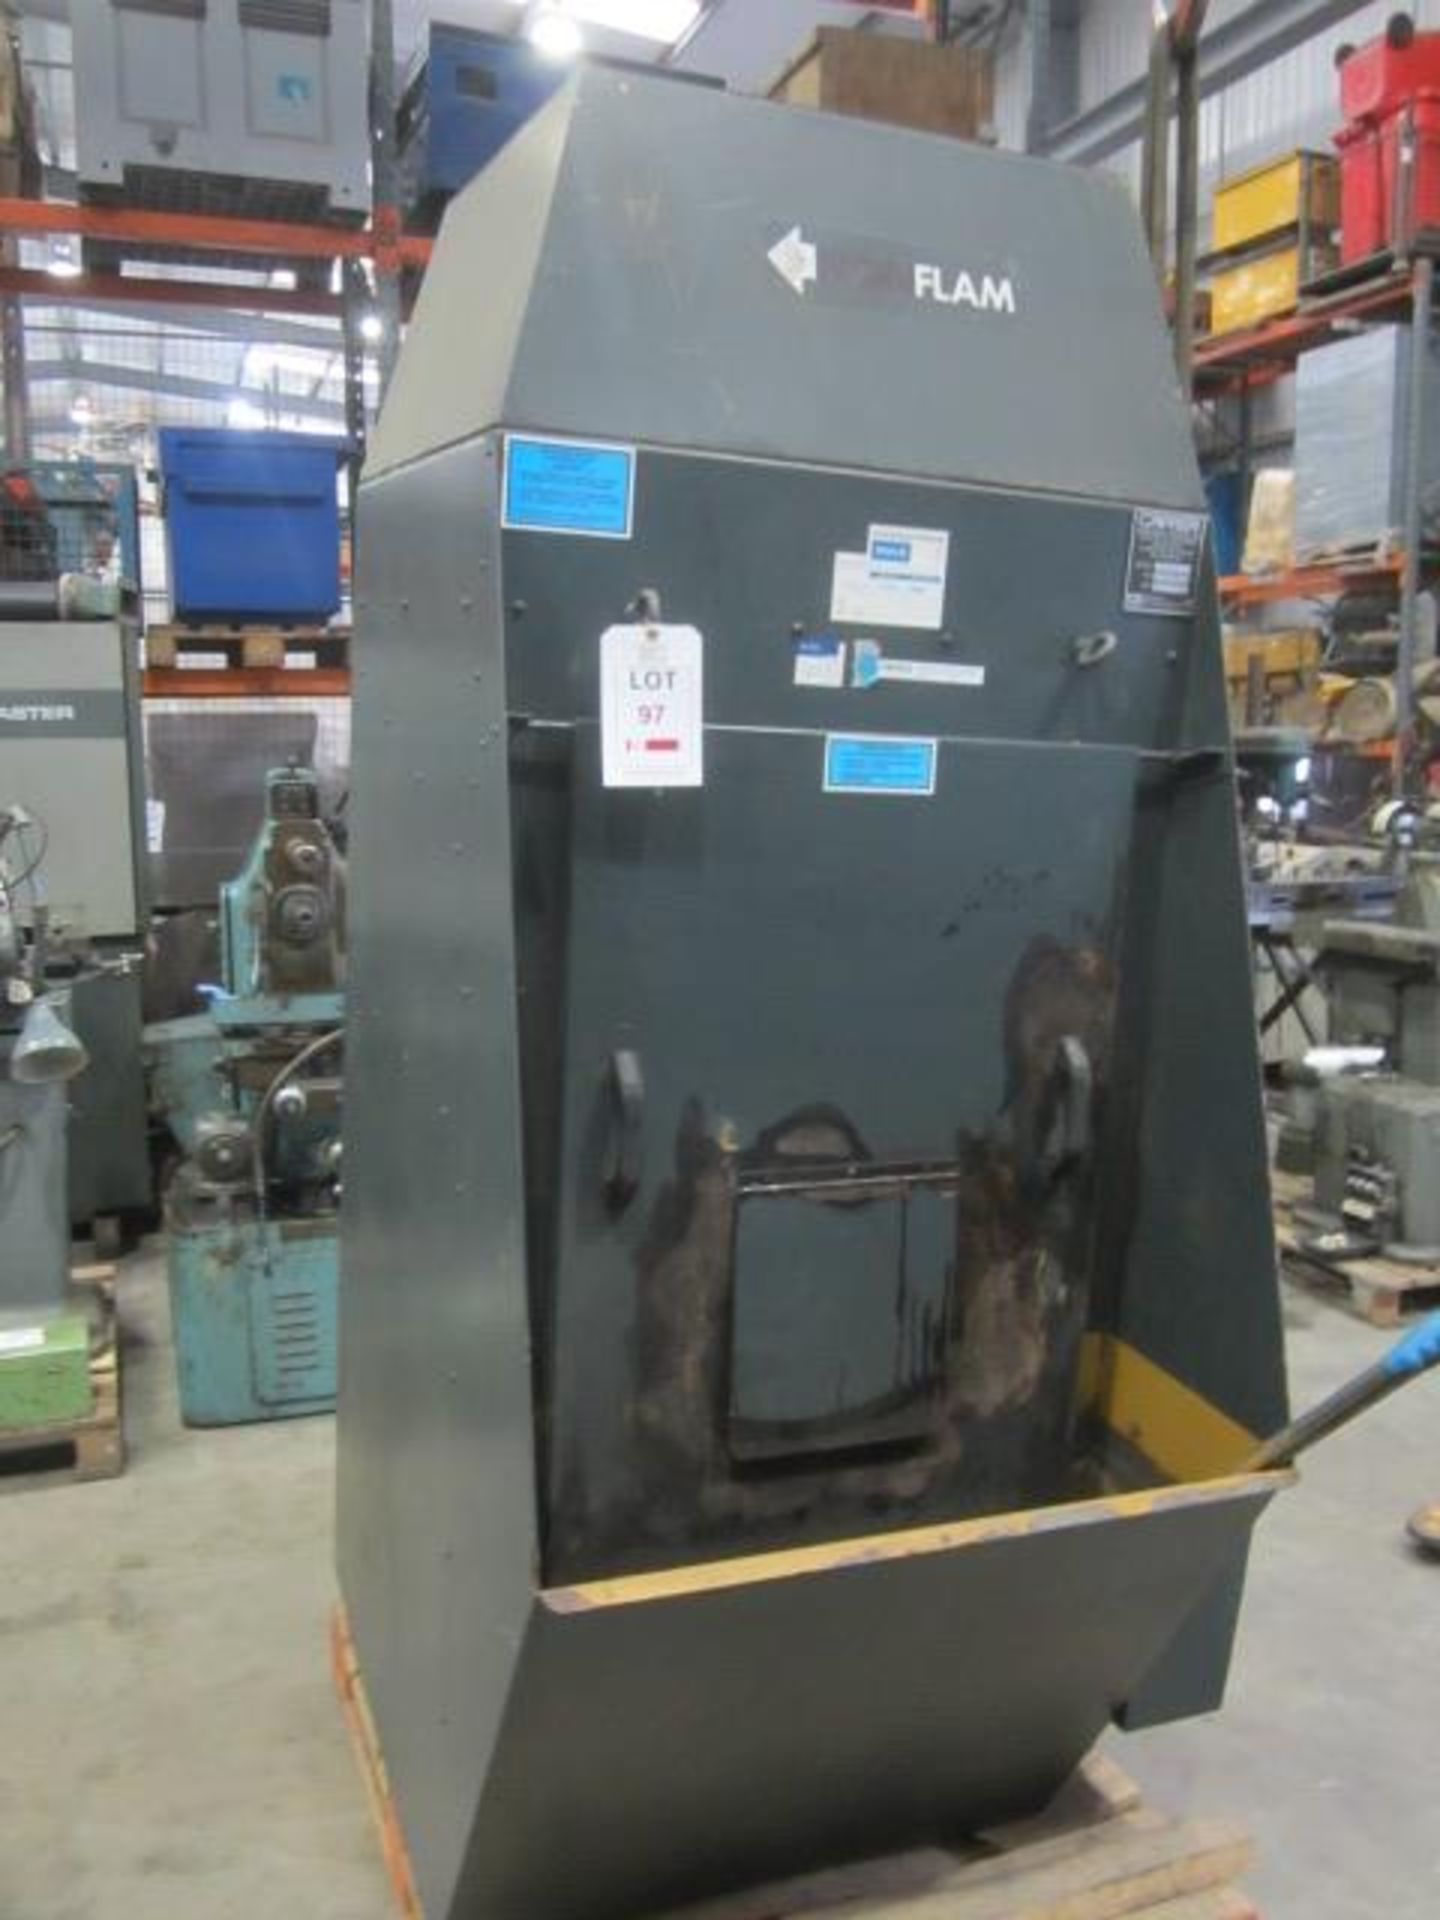 Carter non flammable wet dust cabinet, type W120 17.5kw, serial no. 130401 (2013). A mandatory lift